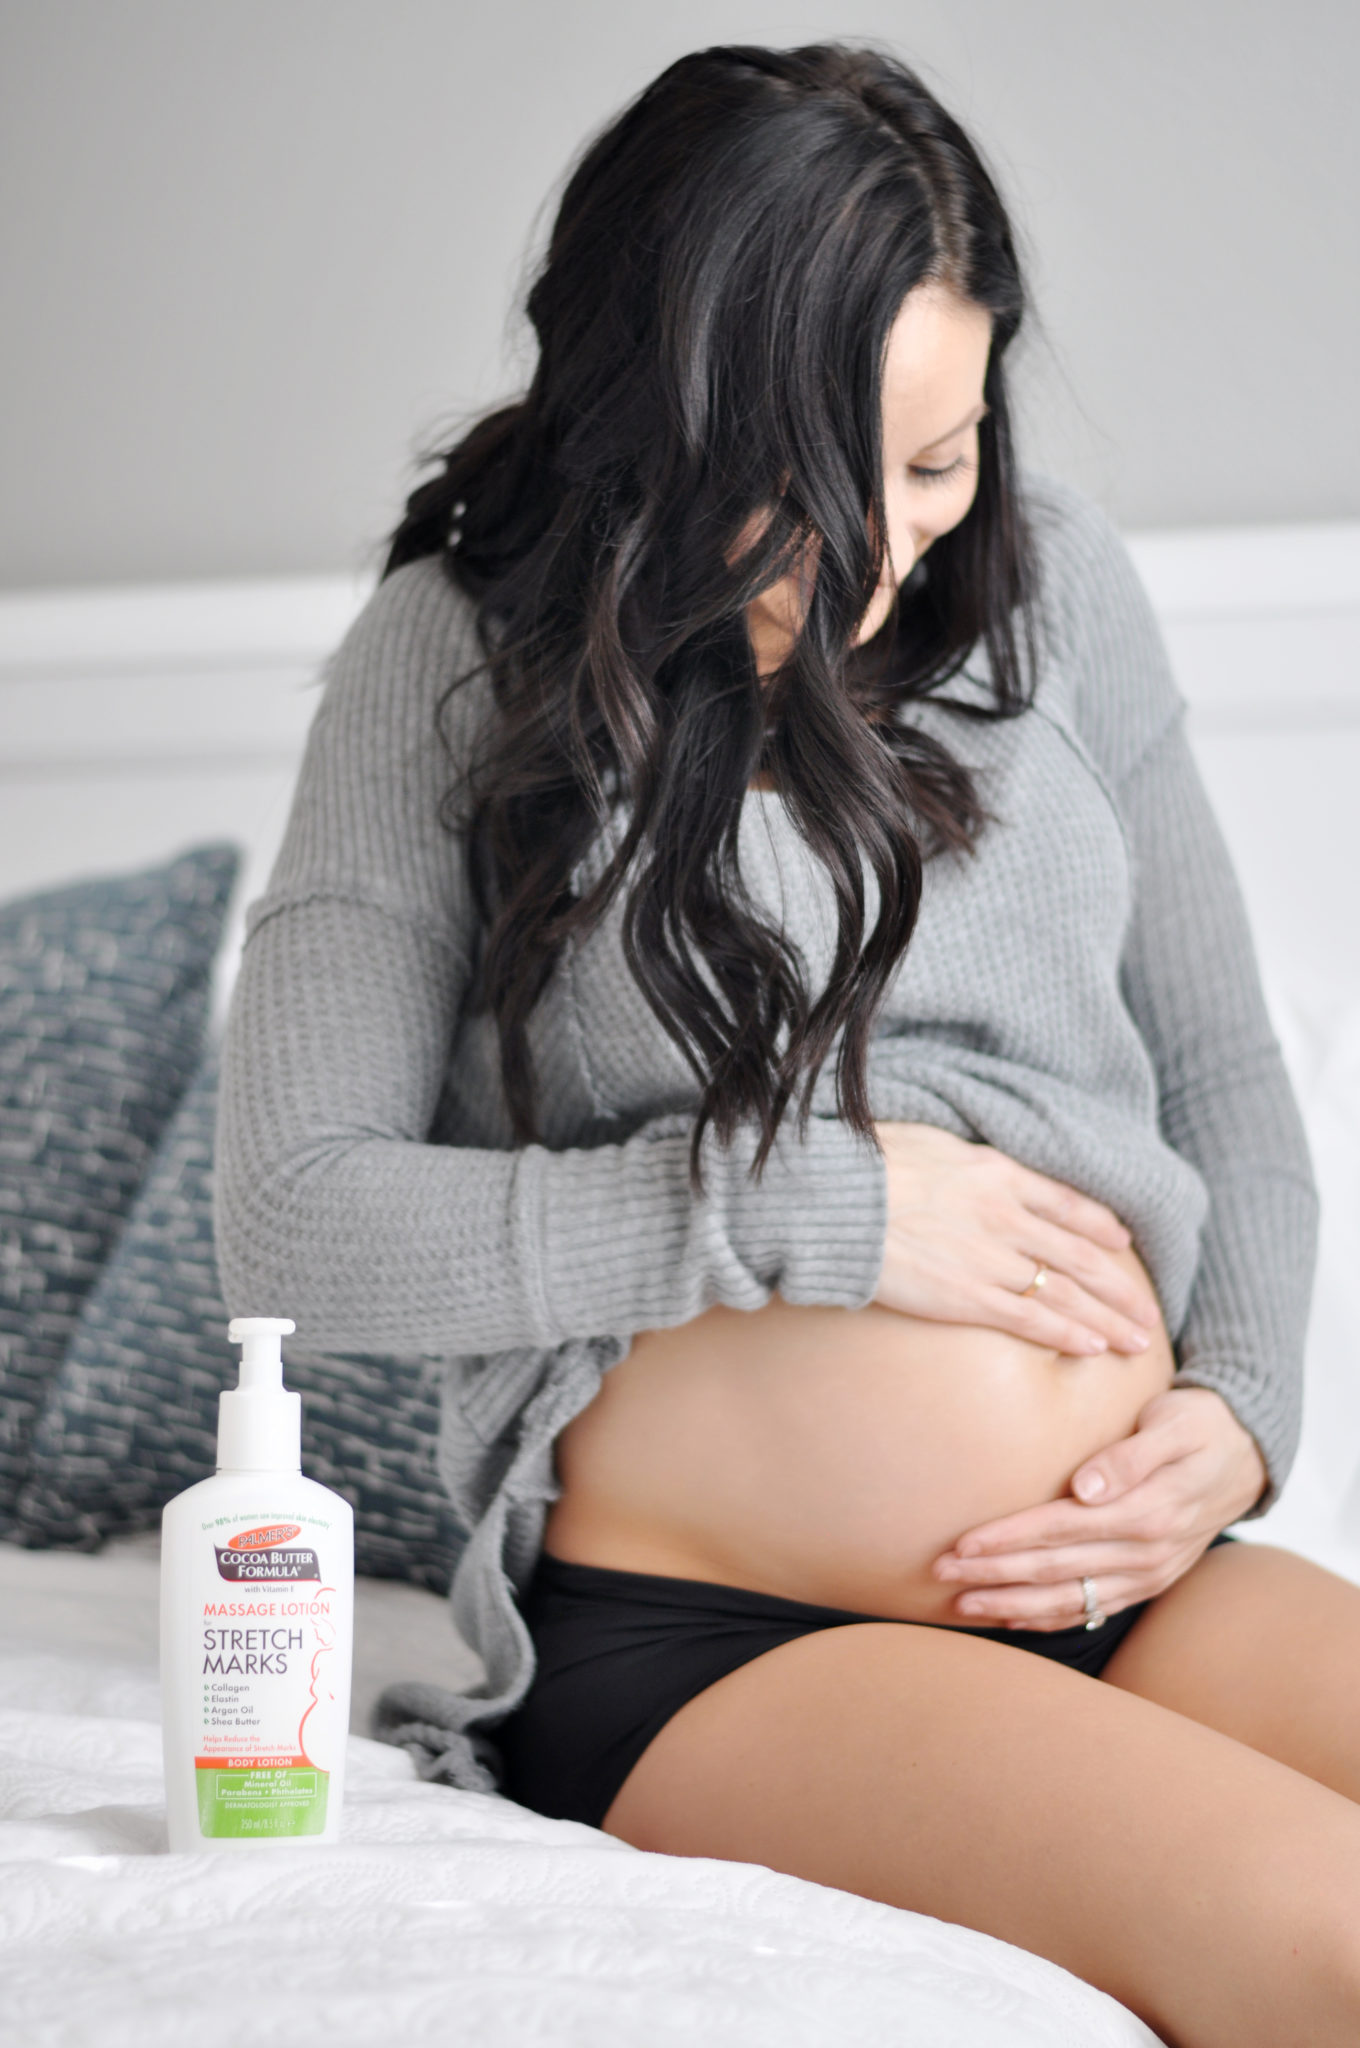 My Go-To Stretch Mark Cream by popular Las Vegas style blogger and expecting mom Outfits & Outings